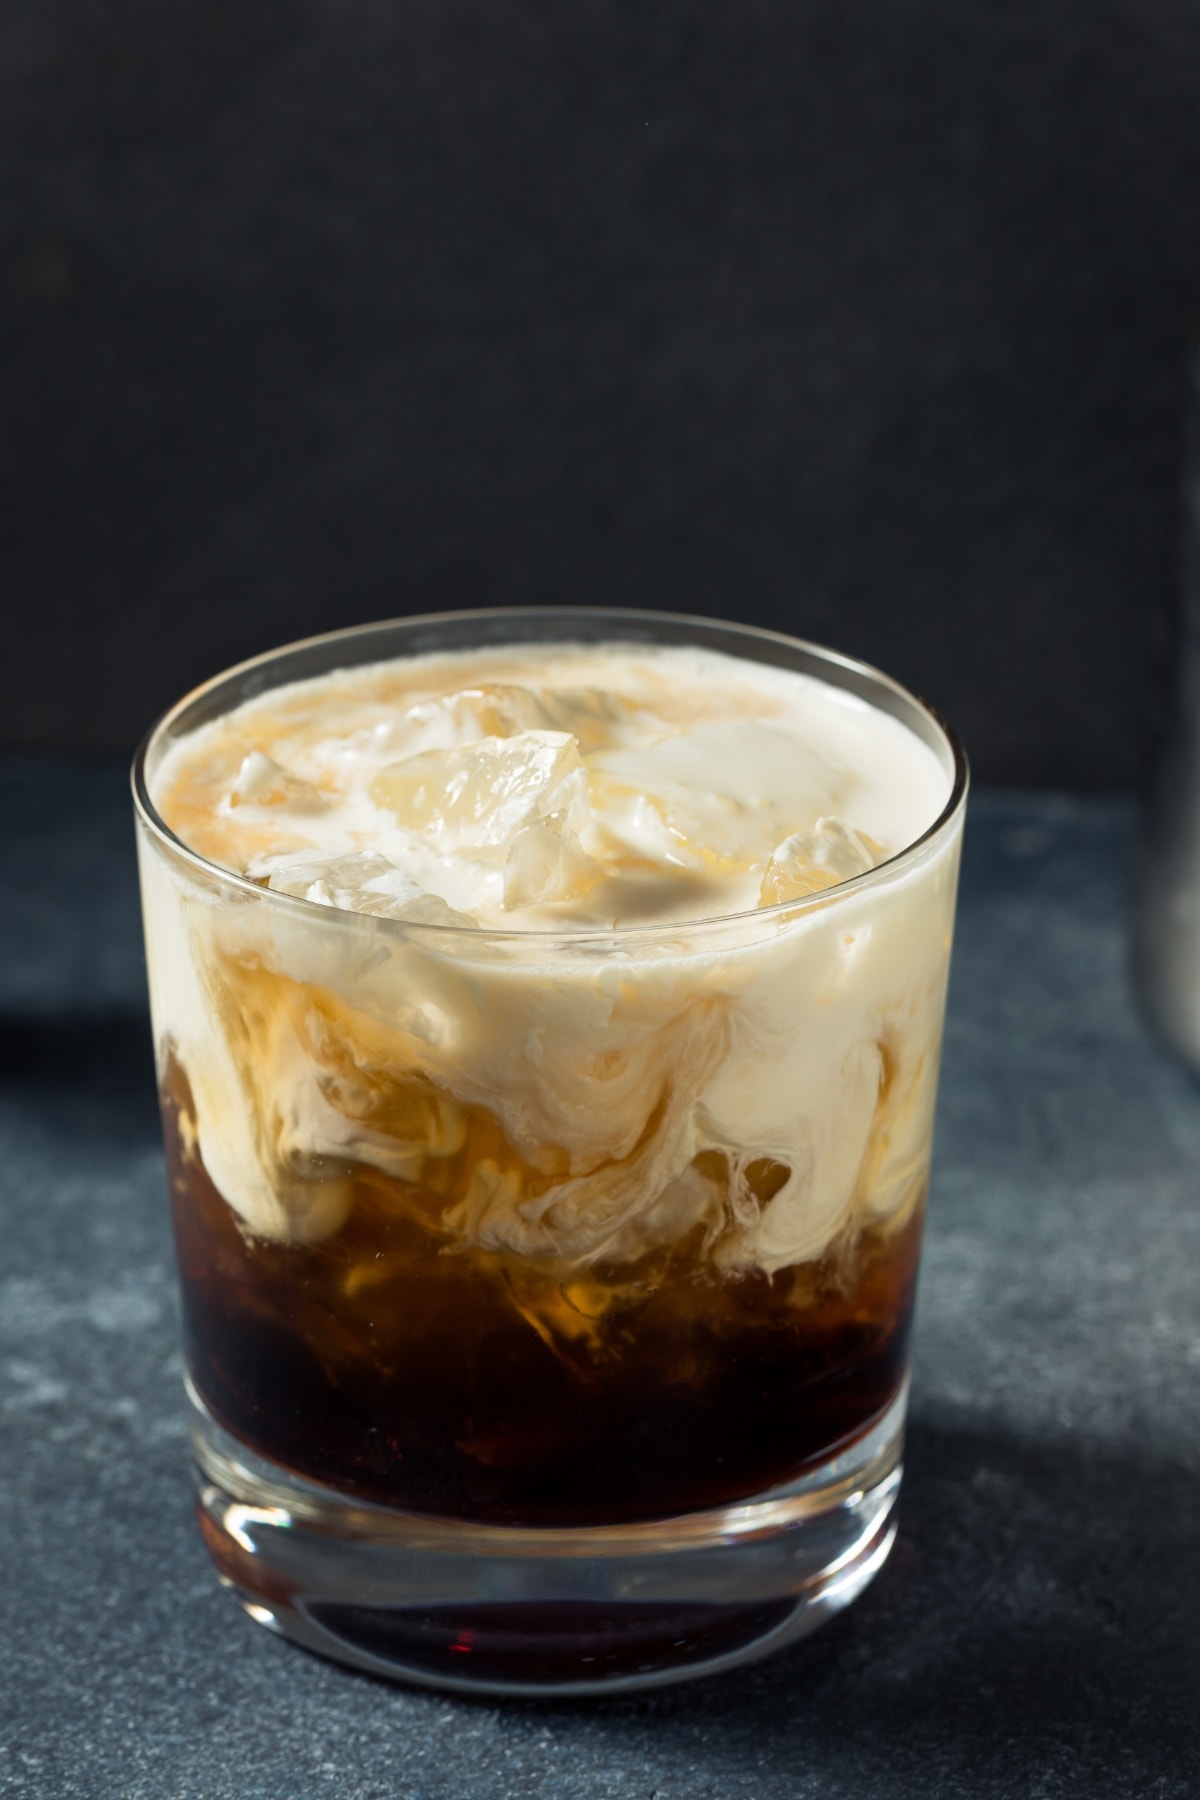 Iced cocktail mixed with cream on a glass.